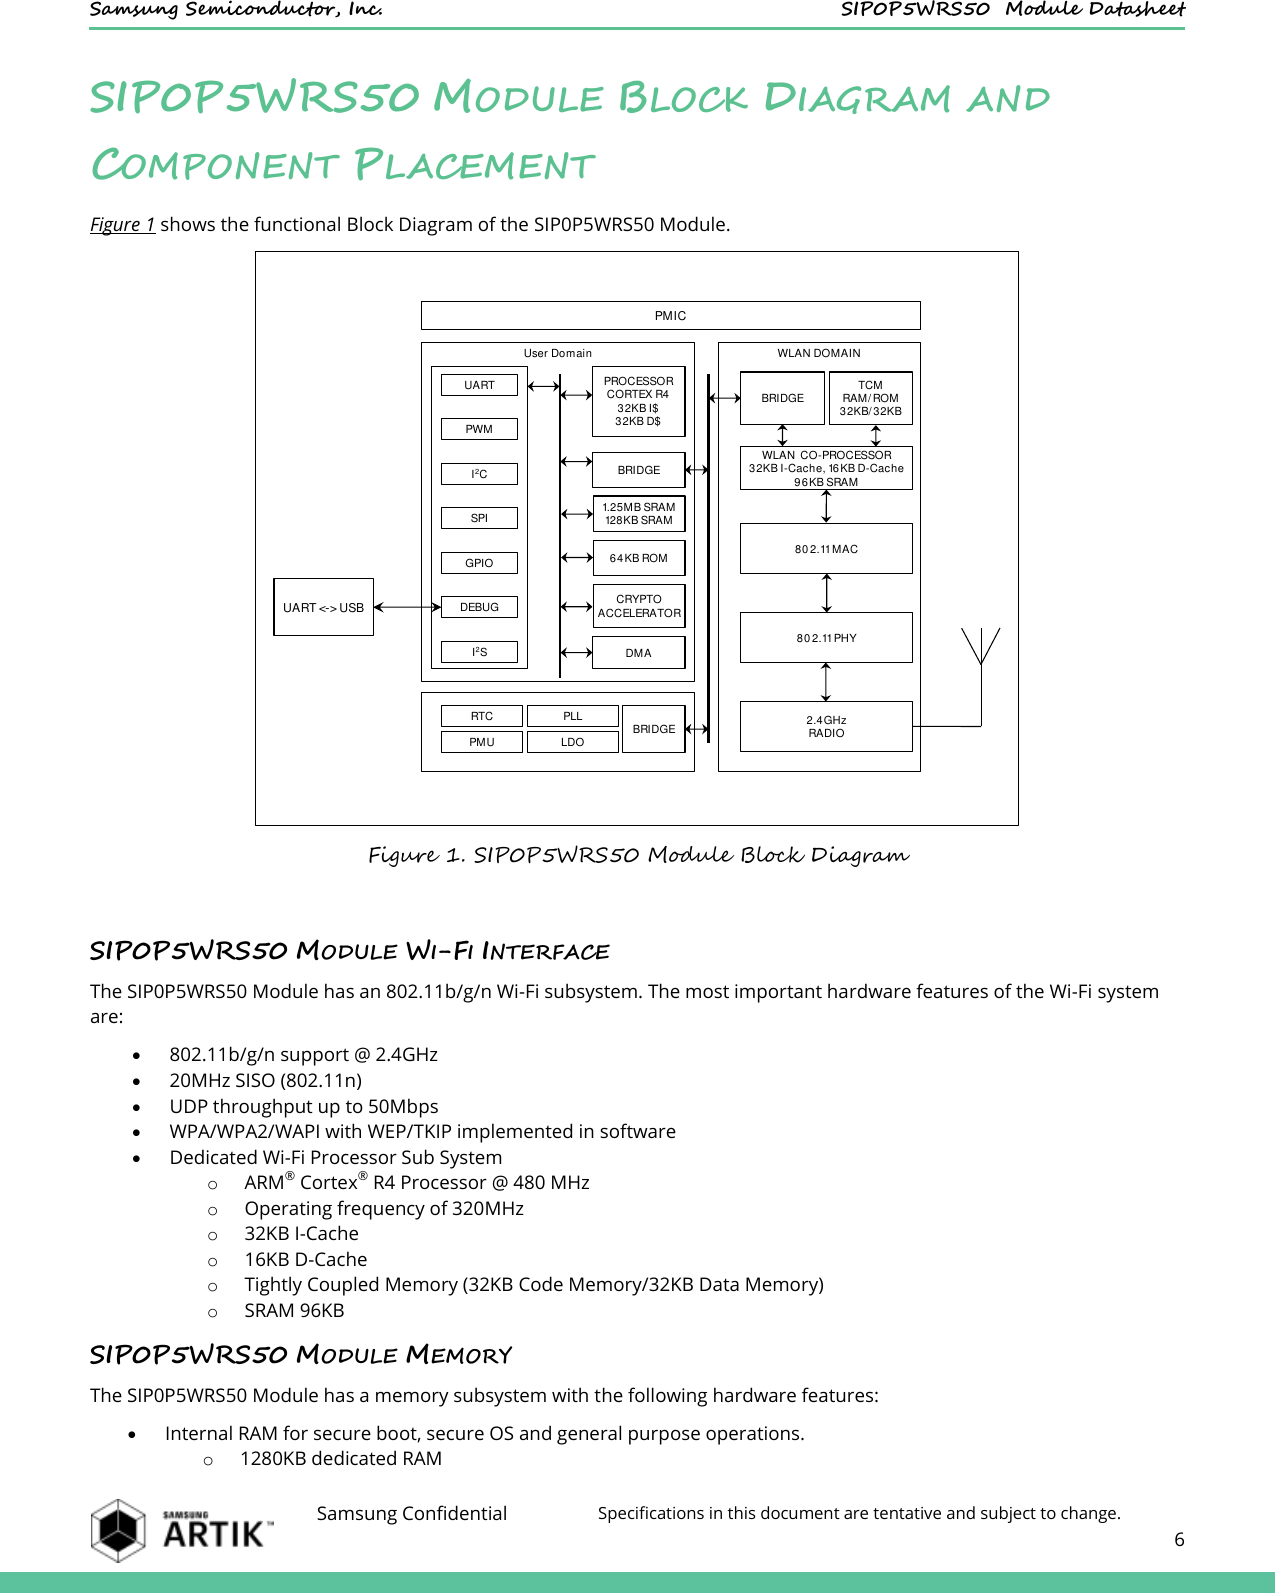    Samsung Semiconductor, Inc.  SIP0P5WRS50  Module Datasheet    Samsung Confidential Specifications in this document are tentative and subject to change.  6  SIP0P5WRS50 MODULE BLOCK DIAGRAM AND COMPONENT PLACEMENT Figure 1 shows the functional Block Diagram of the SIP0P5WRS50 Module.  Figure 1. SIP0P5WRS50 Module Block Diagram  SIP0P5WRS50 MODULE WI-FI INTERFACE The SIP0P5WRS50 Module has an 802.11b/g/n Wi-Fi subsystem. The most important hardware features of the Wi-Fi system are:  802.11b/g/n support @ 2.4GHz  20MHz SISO (802.11n)  UDP throughput up to 50Mbps  WPA/WPA2/WAPI with WEP/TKIP implemented in software  Dedicated Wi-Fi Processor Sub System o ARM® Cortex® R4 Processor @ 480 MHz o Operating frequency of 320MHz o 32KB I-Cache o 16KB D-Cache o Tightly Coupled Memory (32KB Code Memory/32KB Data Memory) o SRAM 96KB SIP0P5WRS50 MODULE MEMORY The SIP0P5WRS50 Module has a memory subsystem with the following hardware features:  Internal RAM for secure boot, secure OS and general purpose operations. o 1280KB dedicated RAM User DomainUARTPWMSPIGPIODEBUGI2SPROCESSORCORTEX R432KB I$32KB D$BRIDGECRYPTOACCELERATORDMATCMRAM/ ROM32KB/ 32KBBRIDGEWLAN  CO-PROCESSOR32KB I-Cache, 16KB D-Cache96KB SRAM80 2.11 MACWLAN DOMAIN2.4GHz RADIORTCPMUPLLLDO BRIDGE80 2.11 PHYI2C1.25MB SRAM128KB SRAM64KB ROMUART &lt;-&gt; USBPMIC